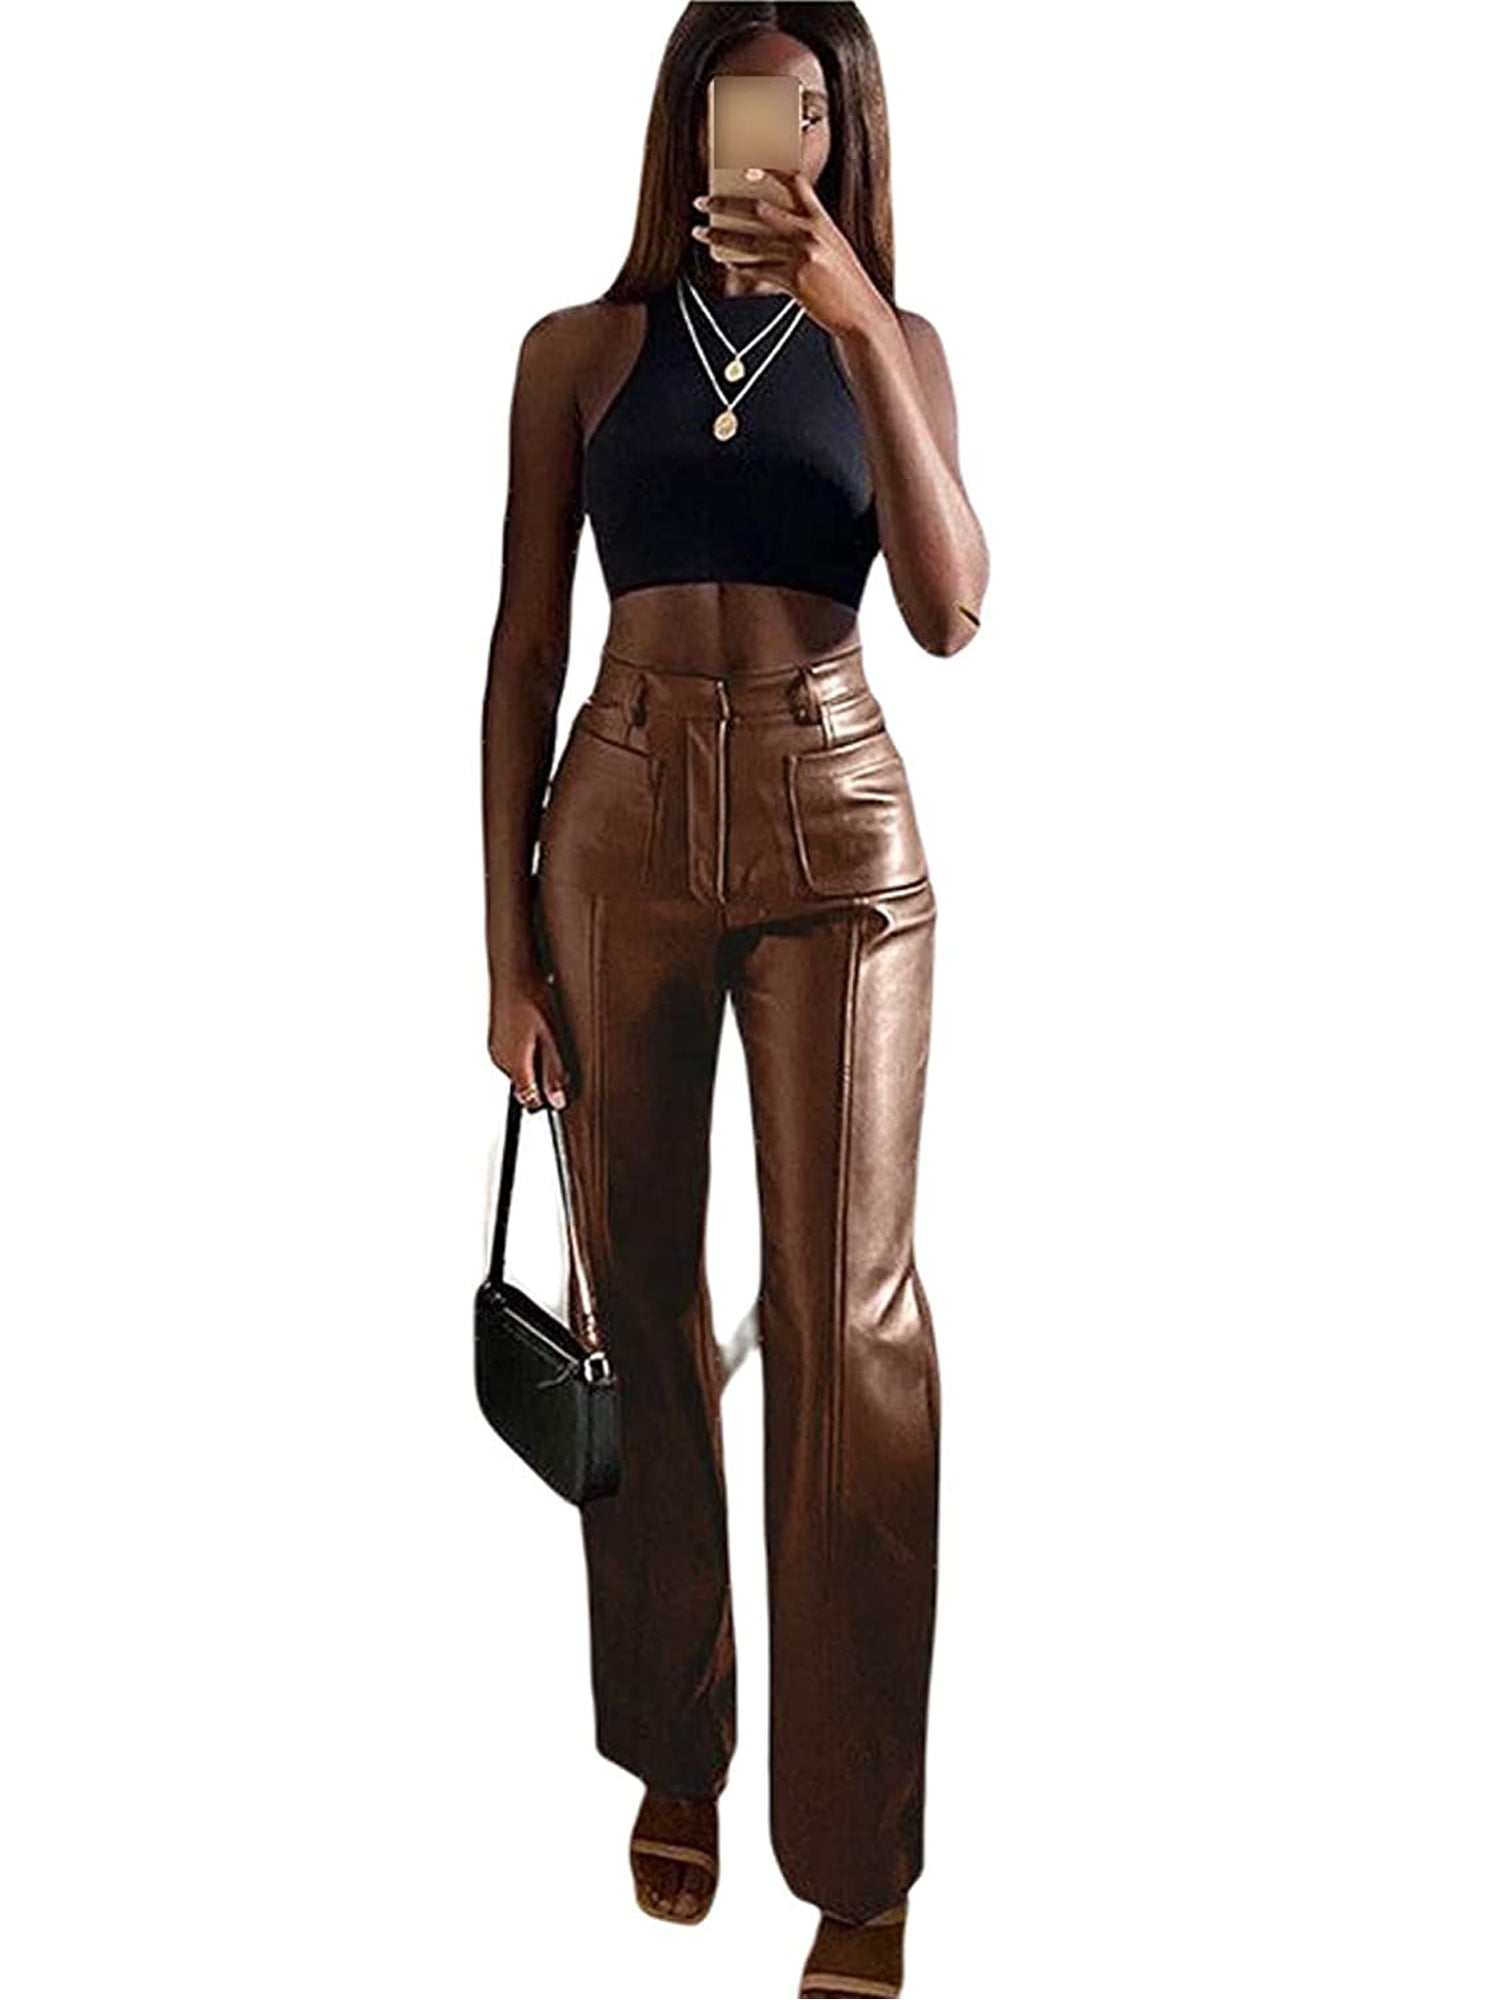 women trouser pant/trousers high waisted leather pant brown/ trouser Slim fit pant Handmade lambskin leather pants women brown leather pant